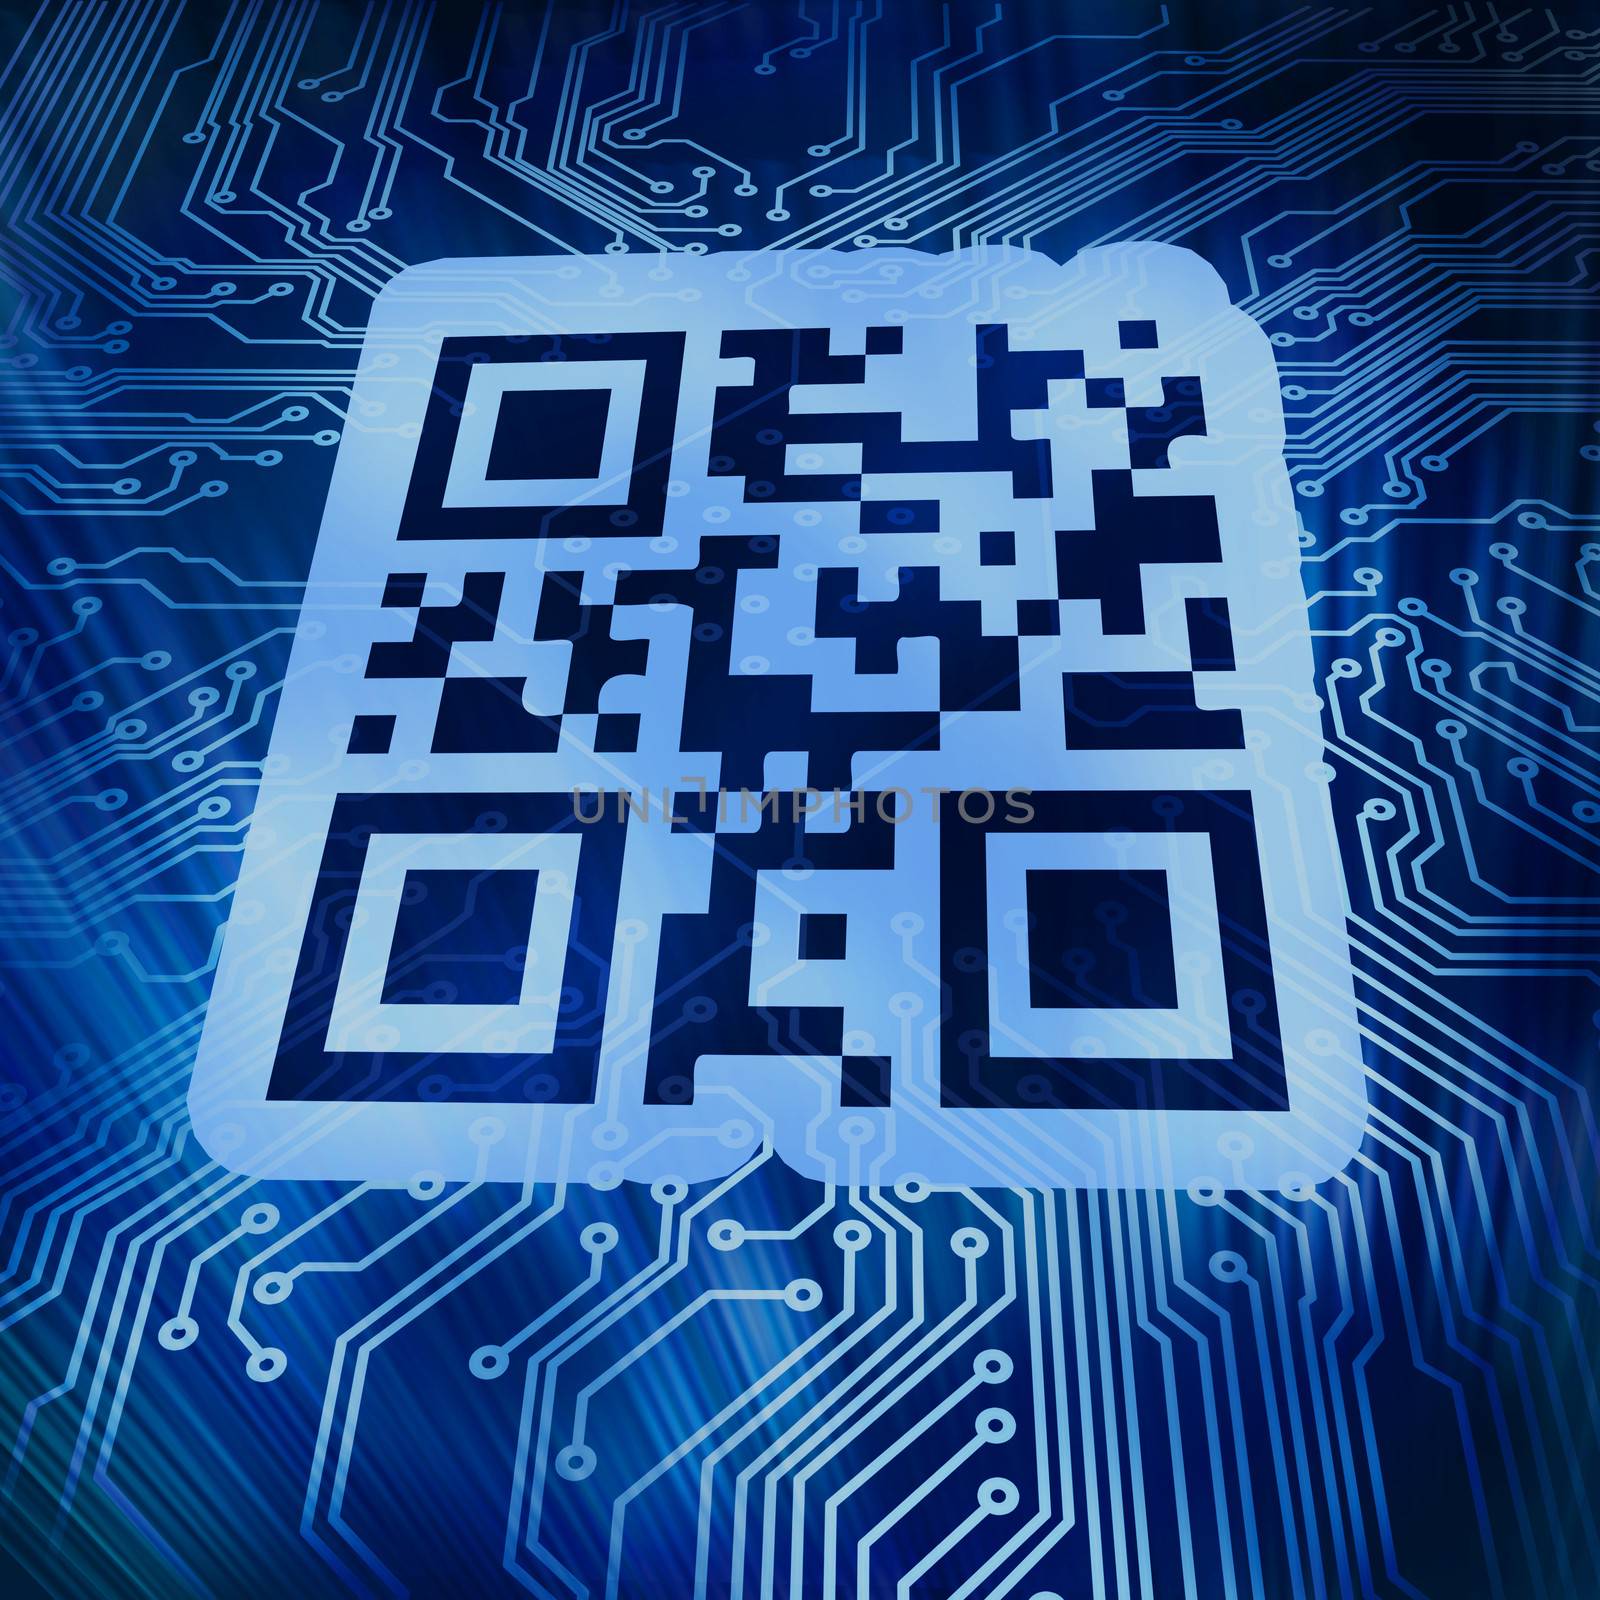 Qr code standing in front of futuristic background by Wavebreakmedia